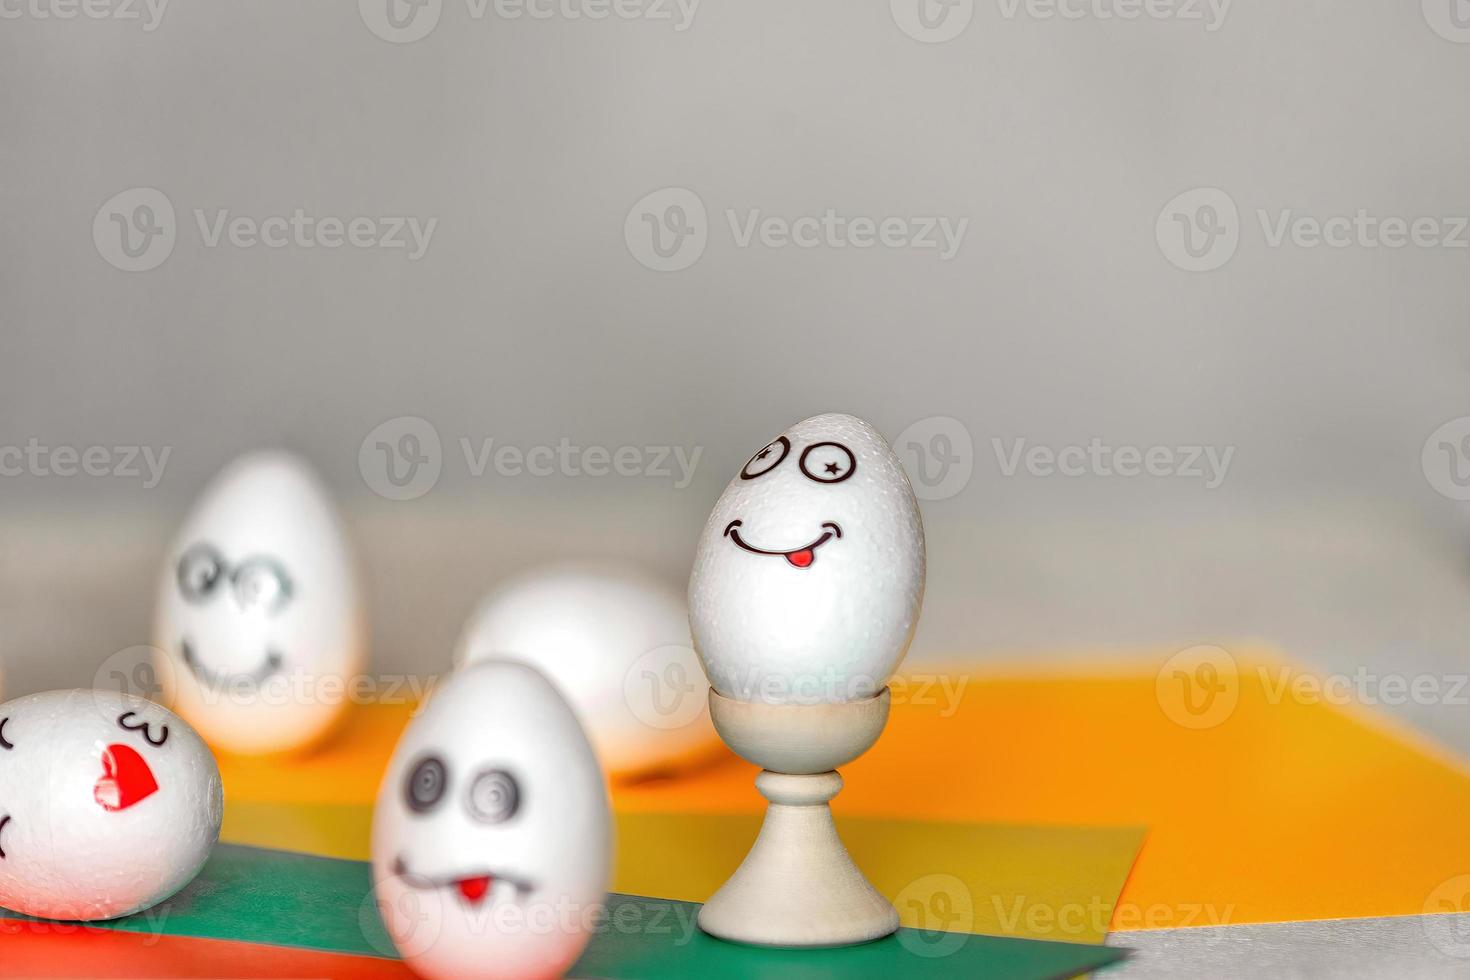 stickers with different emotions are pasted on white eggs, copy space .the concept of communication and emotions in social networks, unusual decoration of easter eggs photo